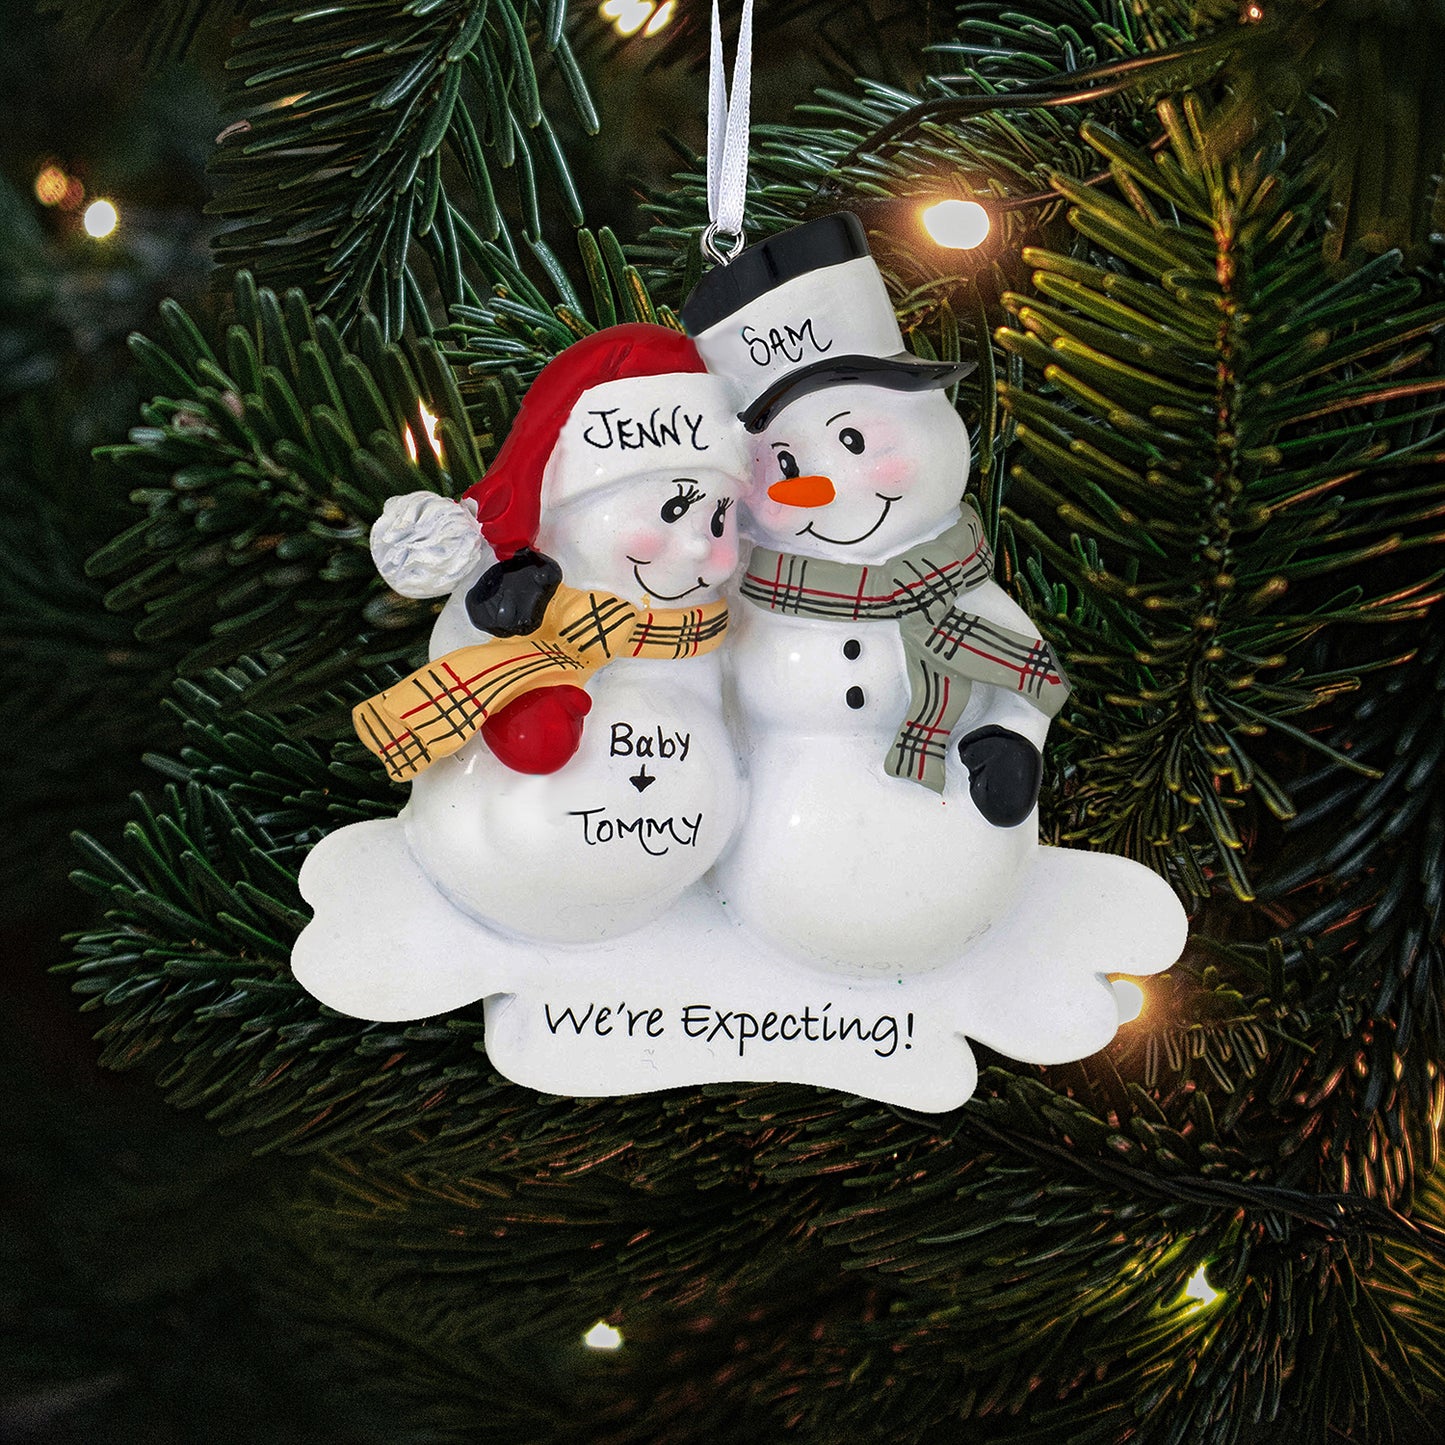 We're Expecting! - Christmas Couples Decoration